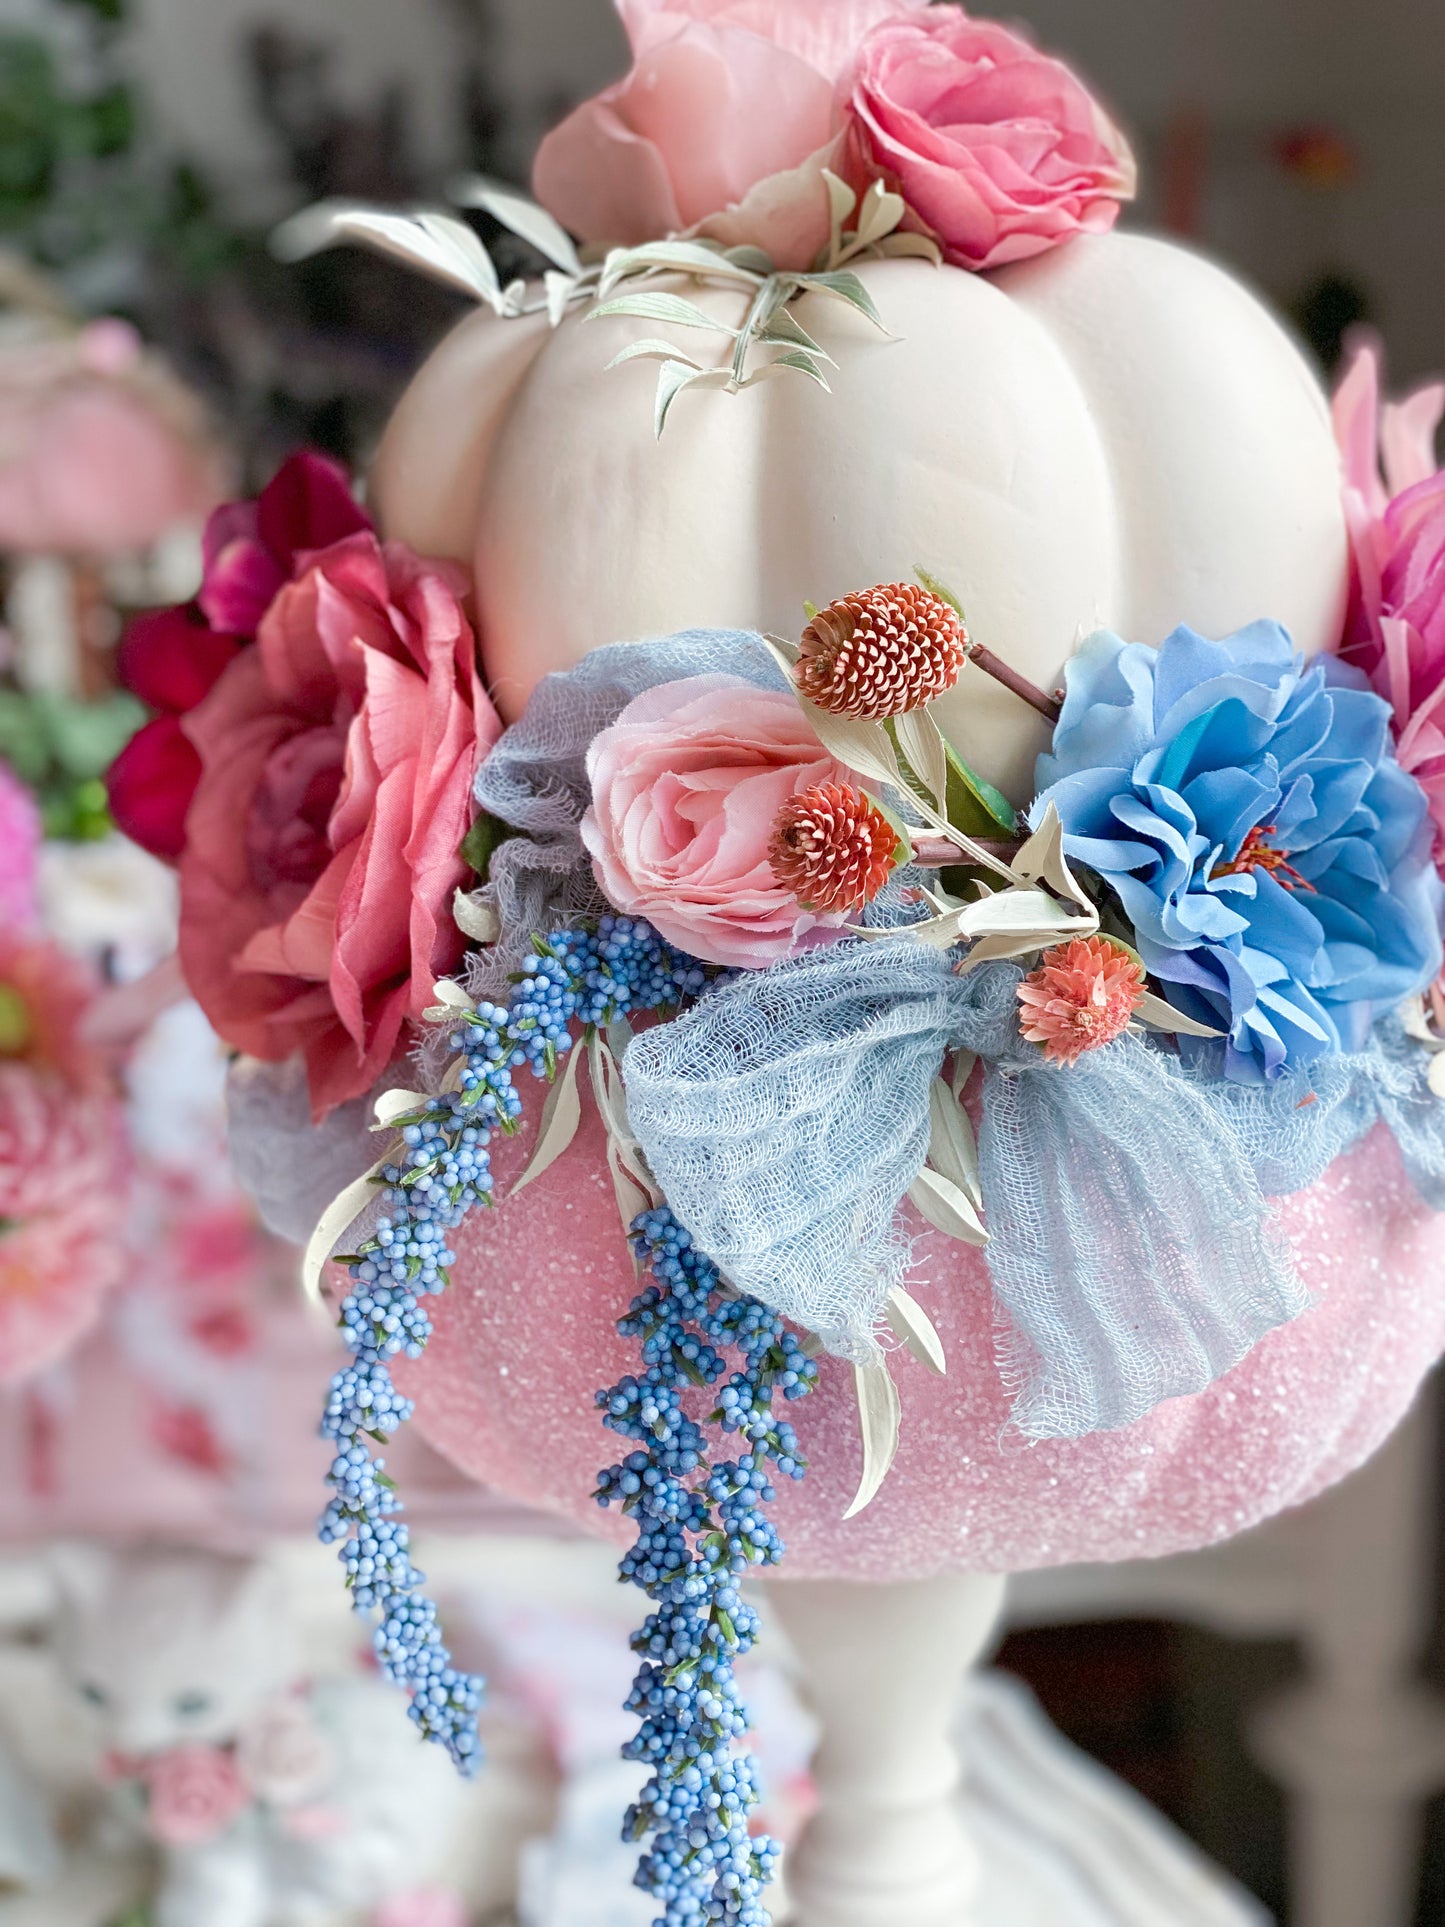 Bespoke Upcycled Pastel Cream, Pink and Blue Glam Glitter Pumpkin Topiary